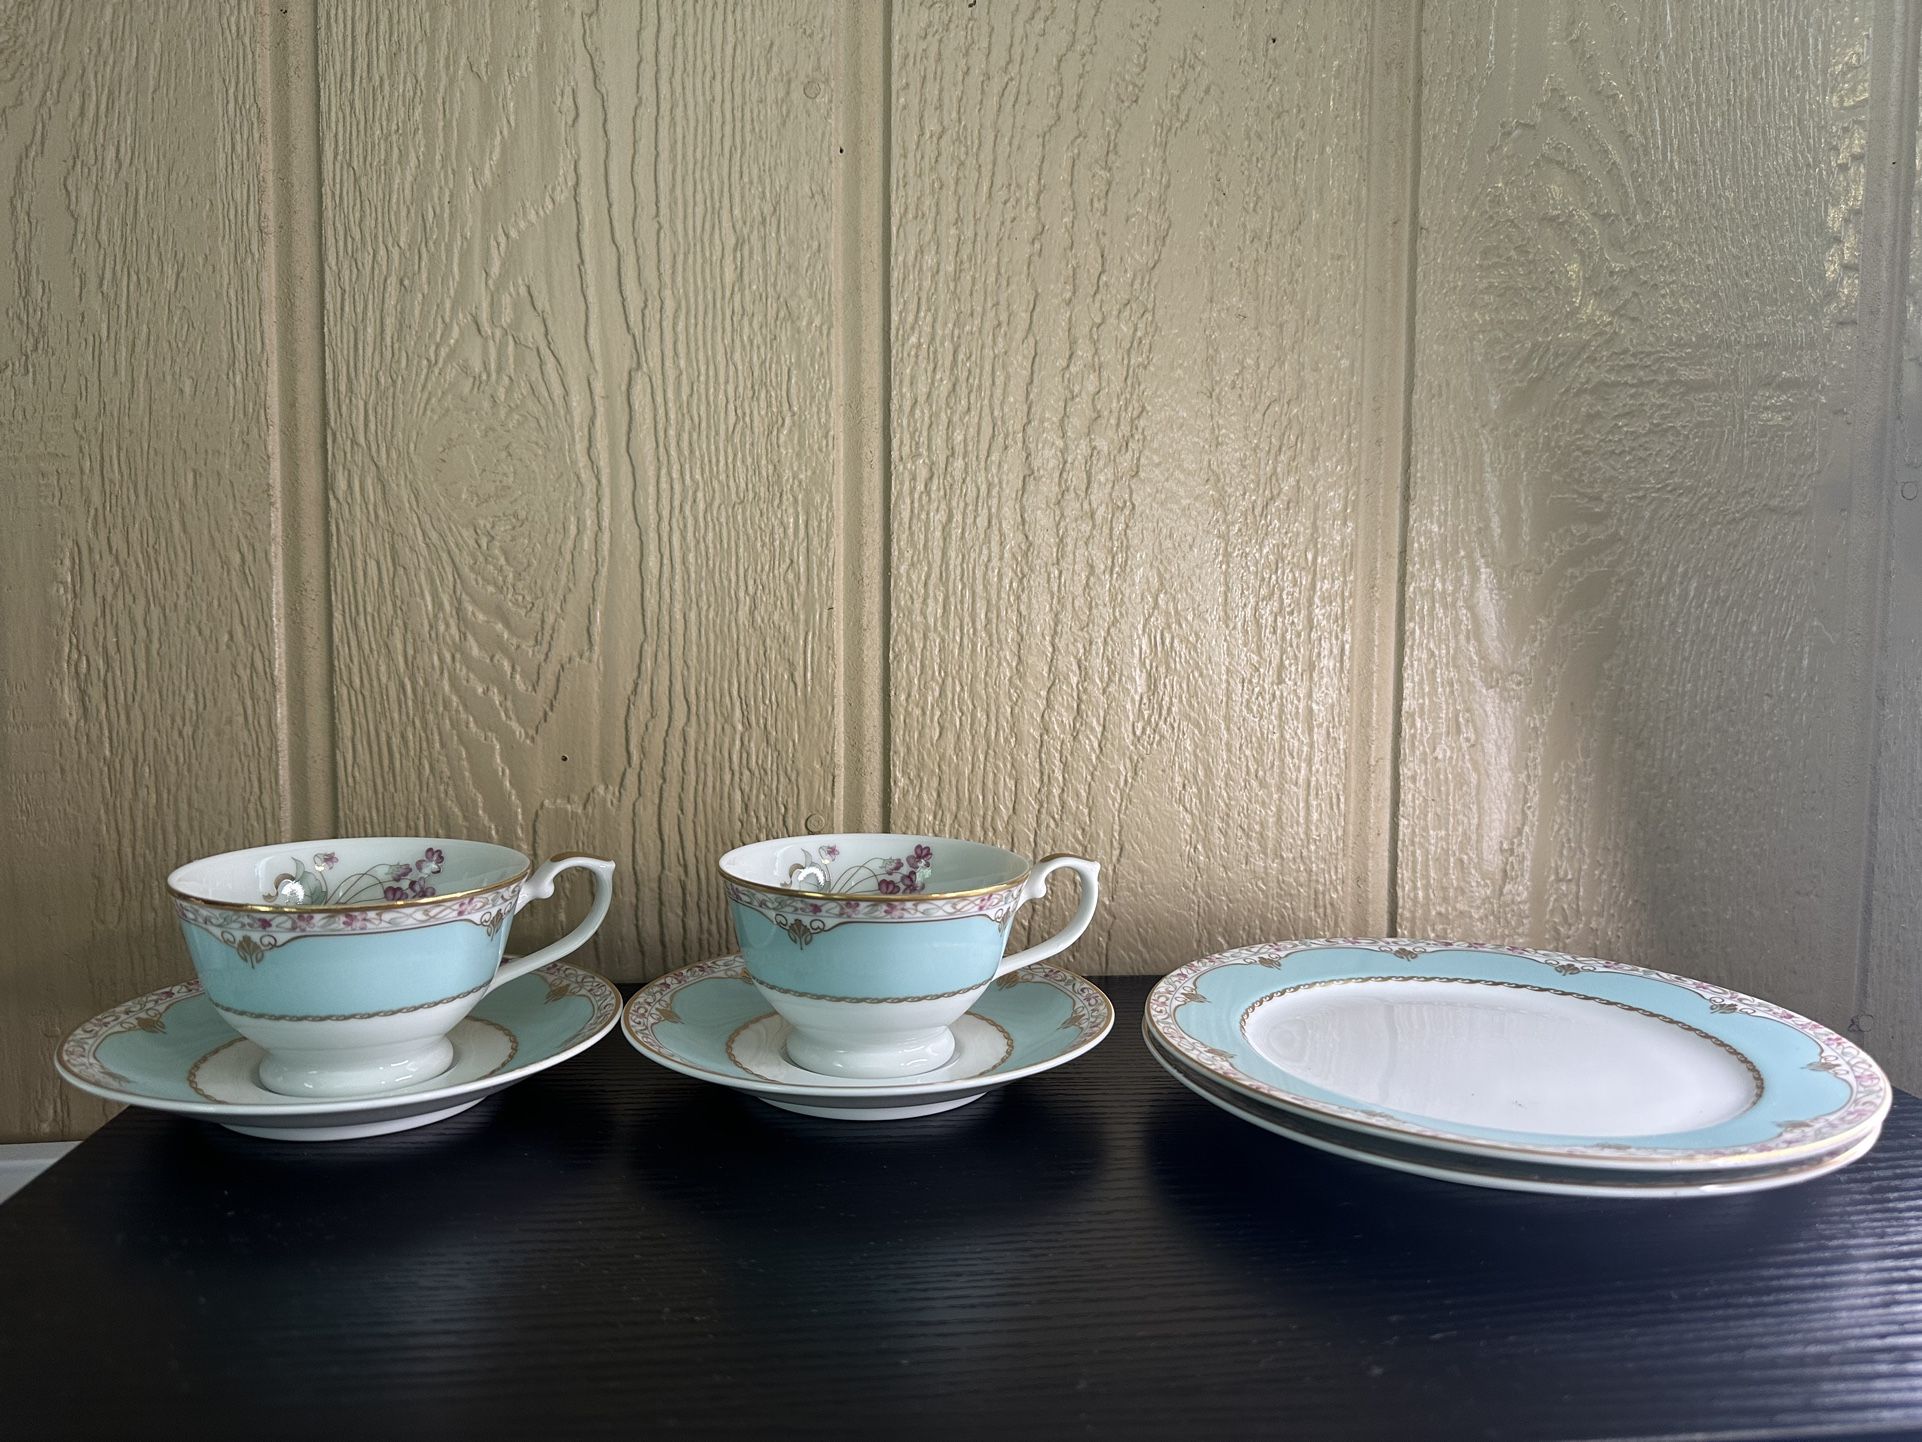 This Is A Hawaii Vintage Collectible Fine China Tea Set. Set Of 6